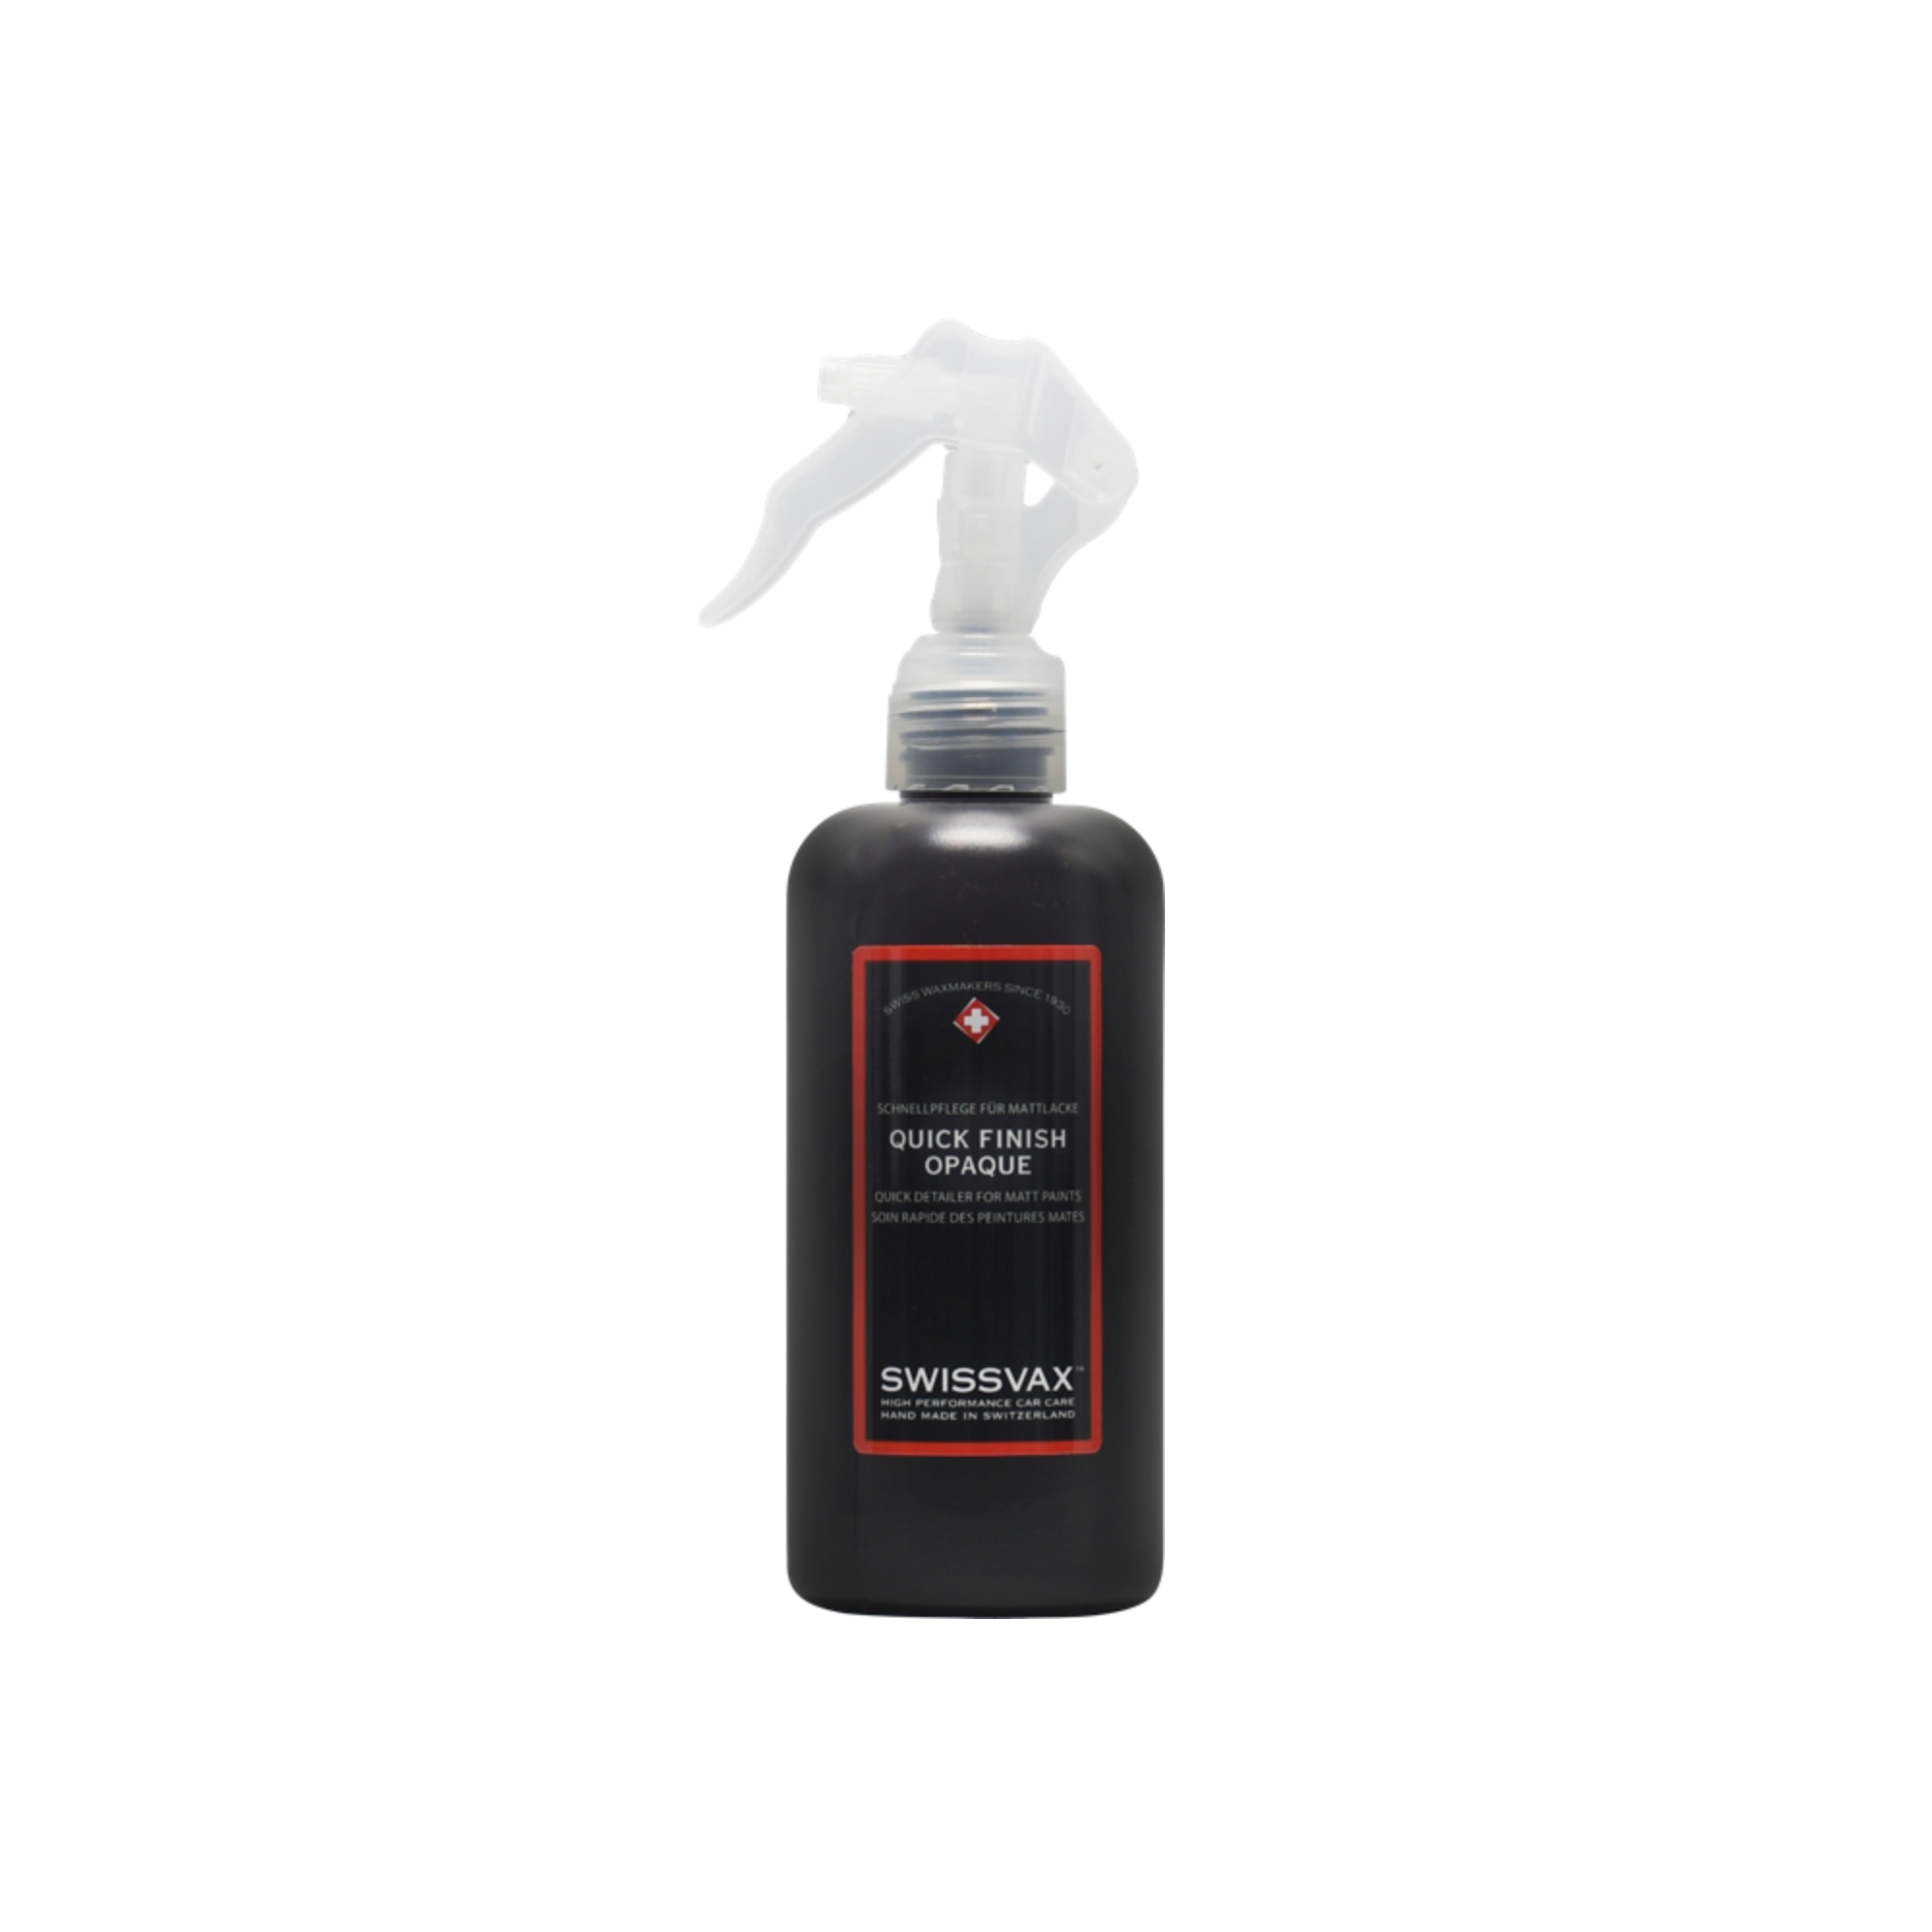 Swissvax QUICK FINISH OPAQUE, Spot Cleaner For Satin/Matte Paint Finishes and wraps